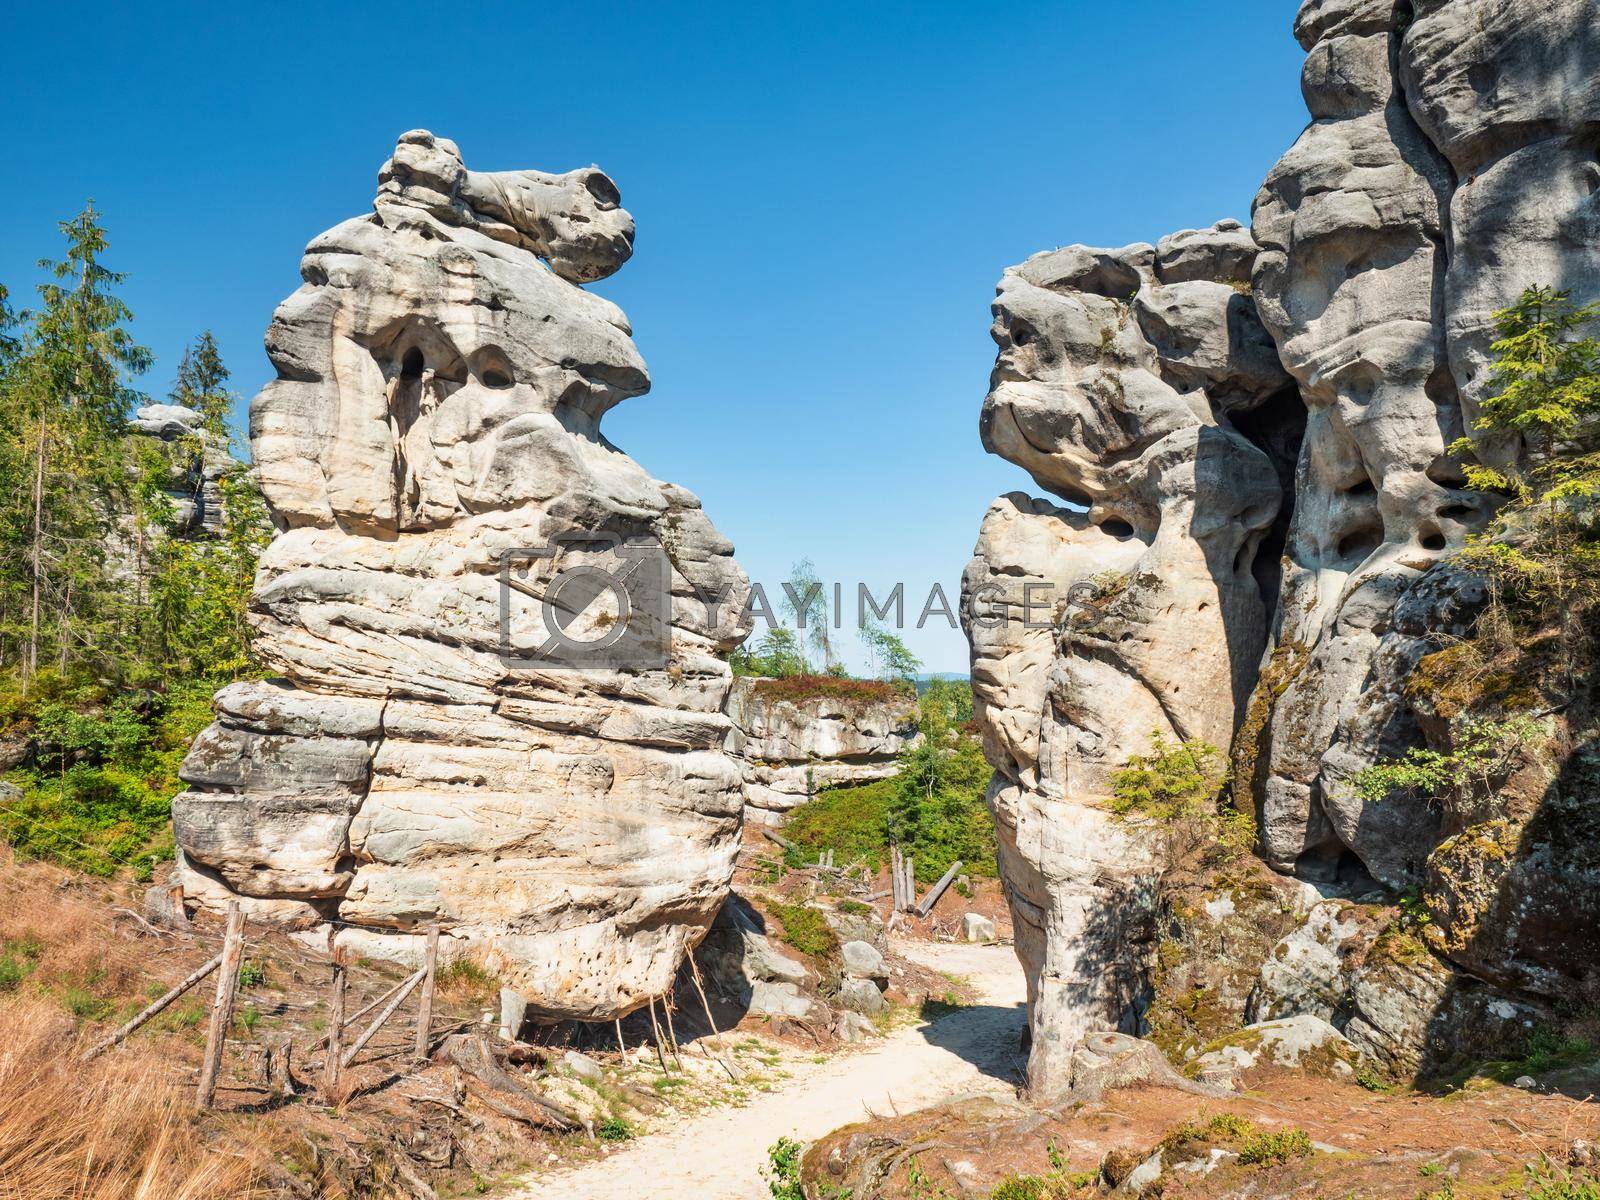 Royalty free image of Ostas rocks and bizarre sandstone formations. by rdonar2